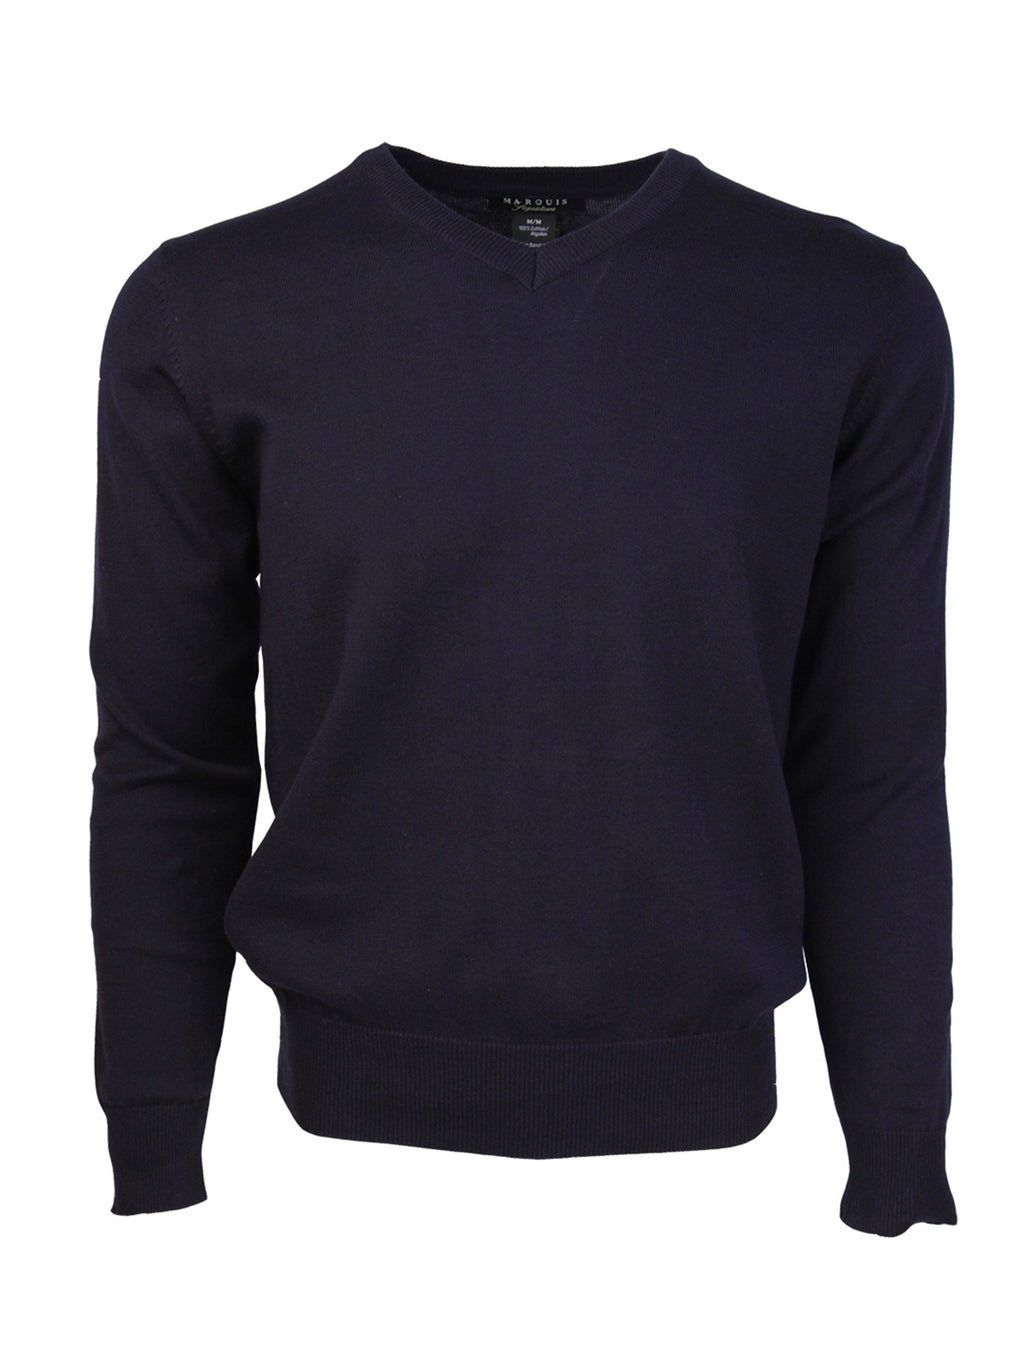 Marquis Men's Modern Fit Solid V-neck Cotton Sweater Sweater TheDapperTie Navy Small 